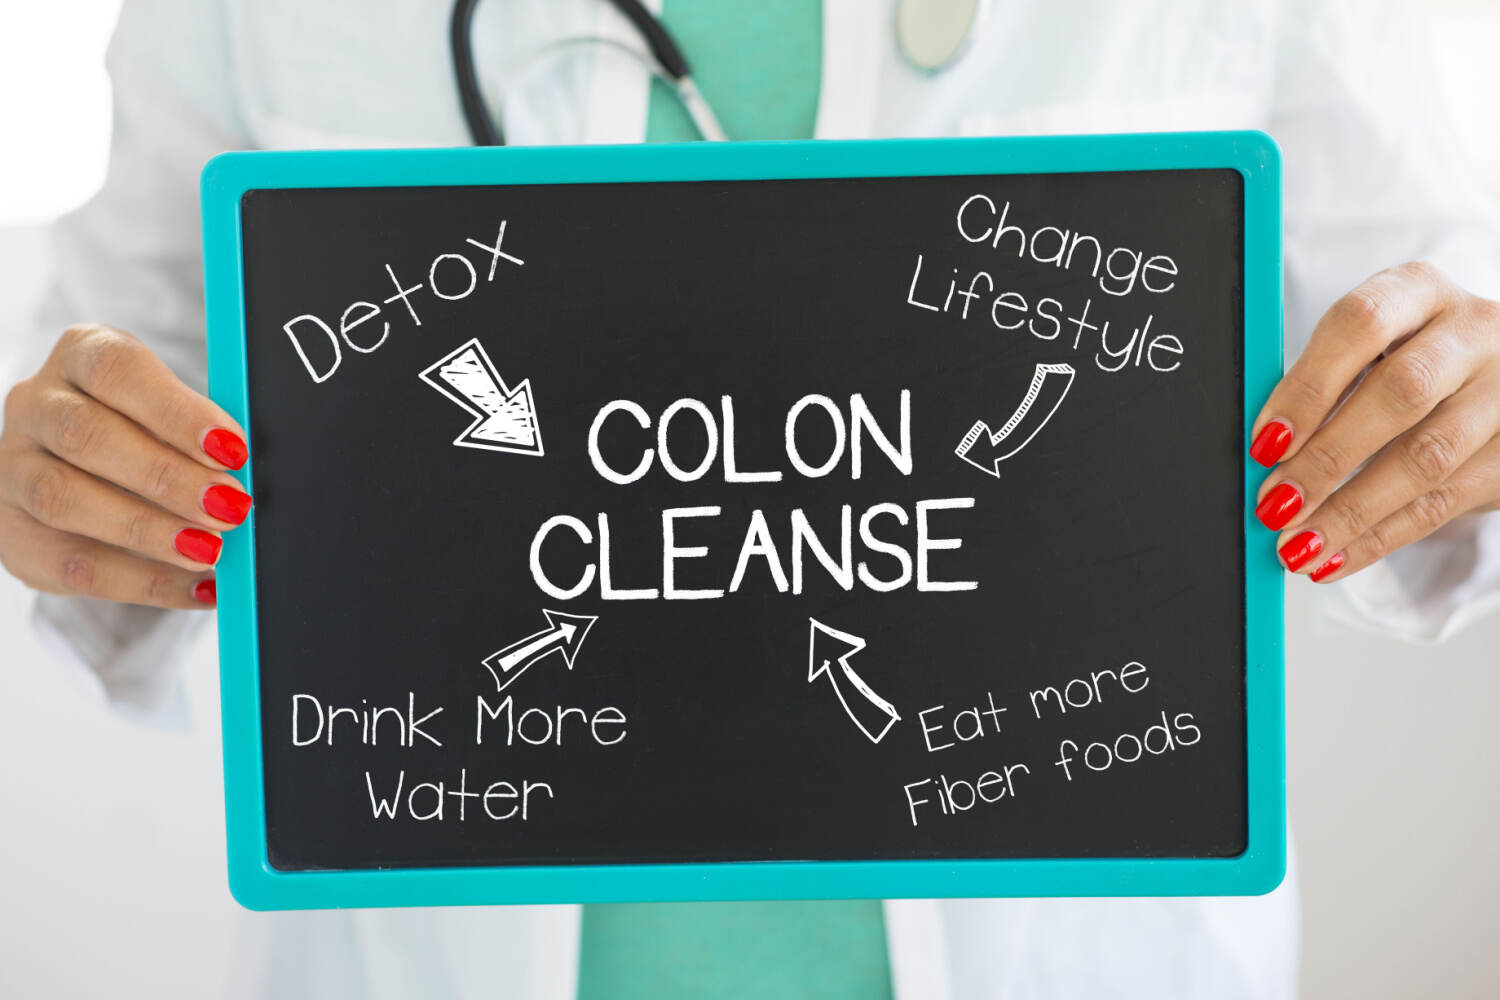 Colon cleansing